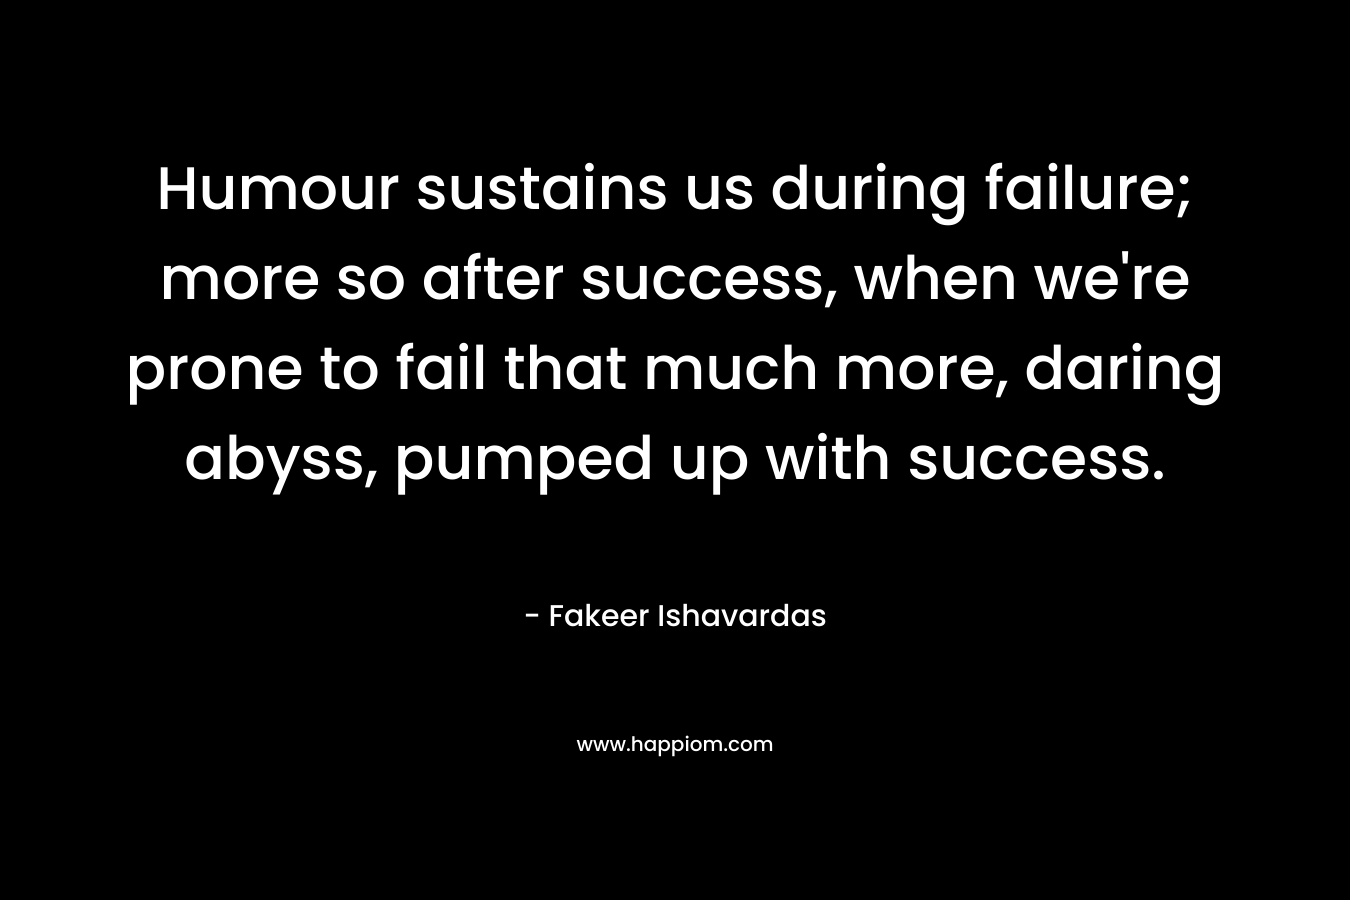 Humour sustains us during failure; more so after success, when we're prone to fail that much more, daring abyss, pumped up with success.